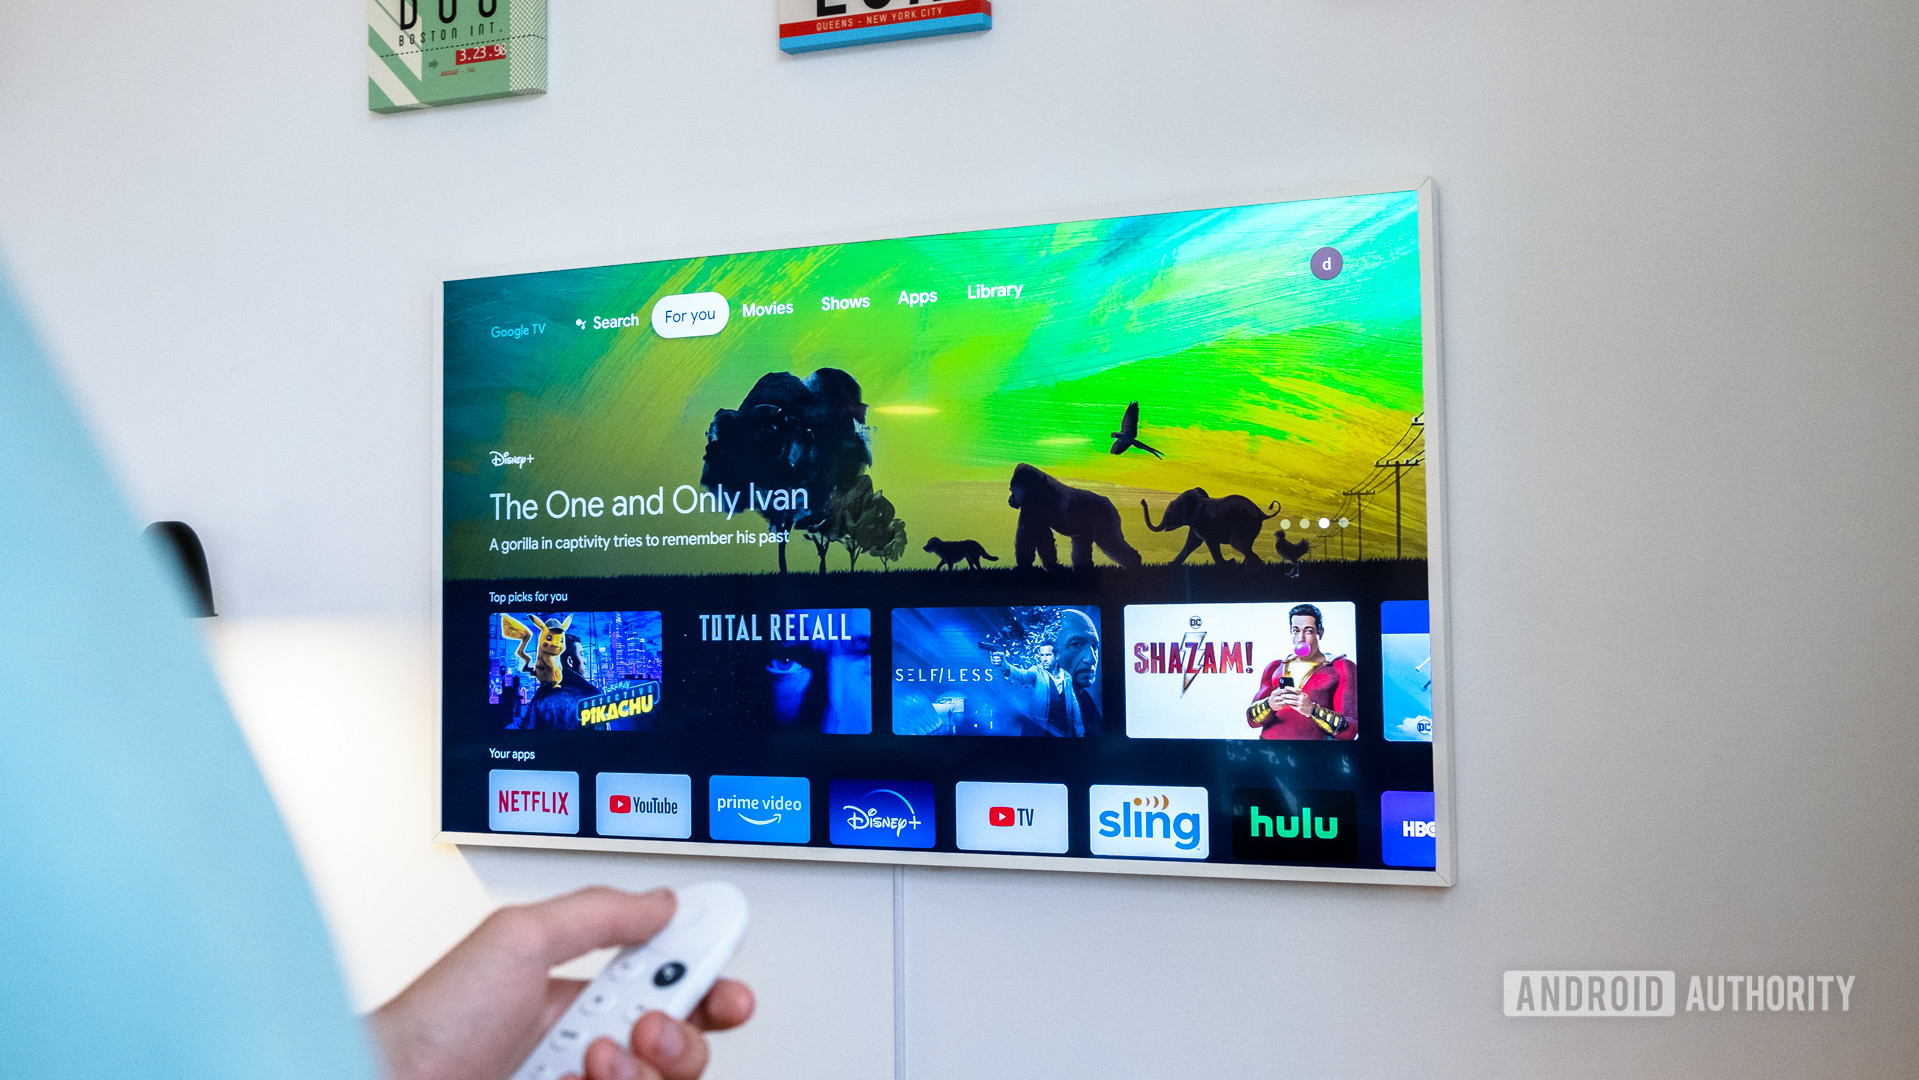 Smart TV streaming device: Don't buy TV based on its software